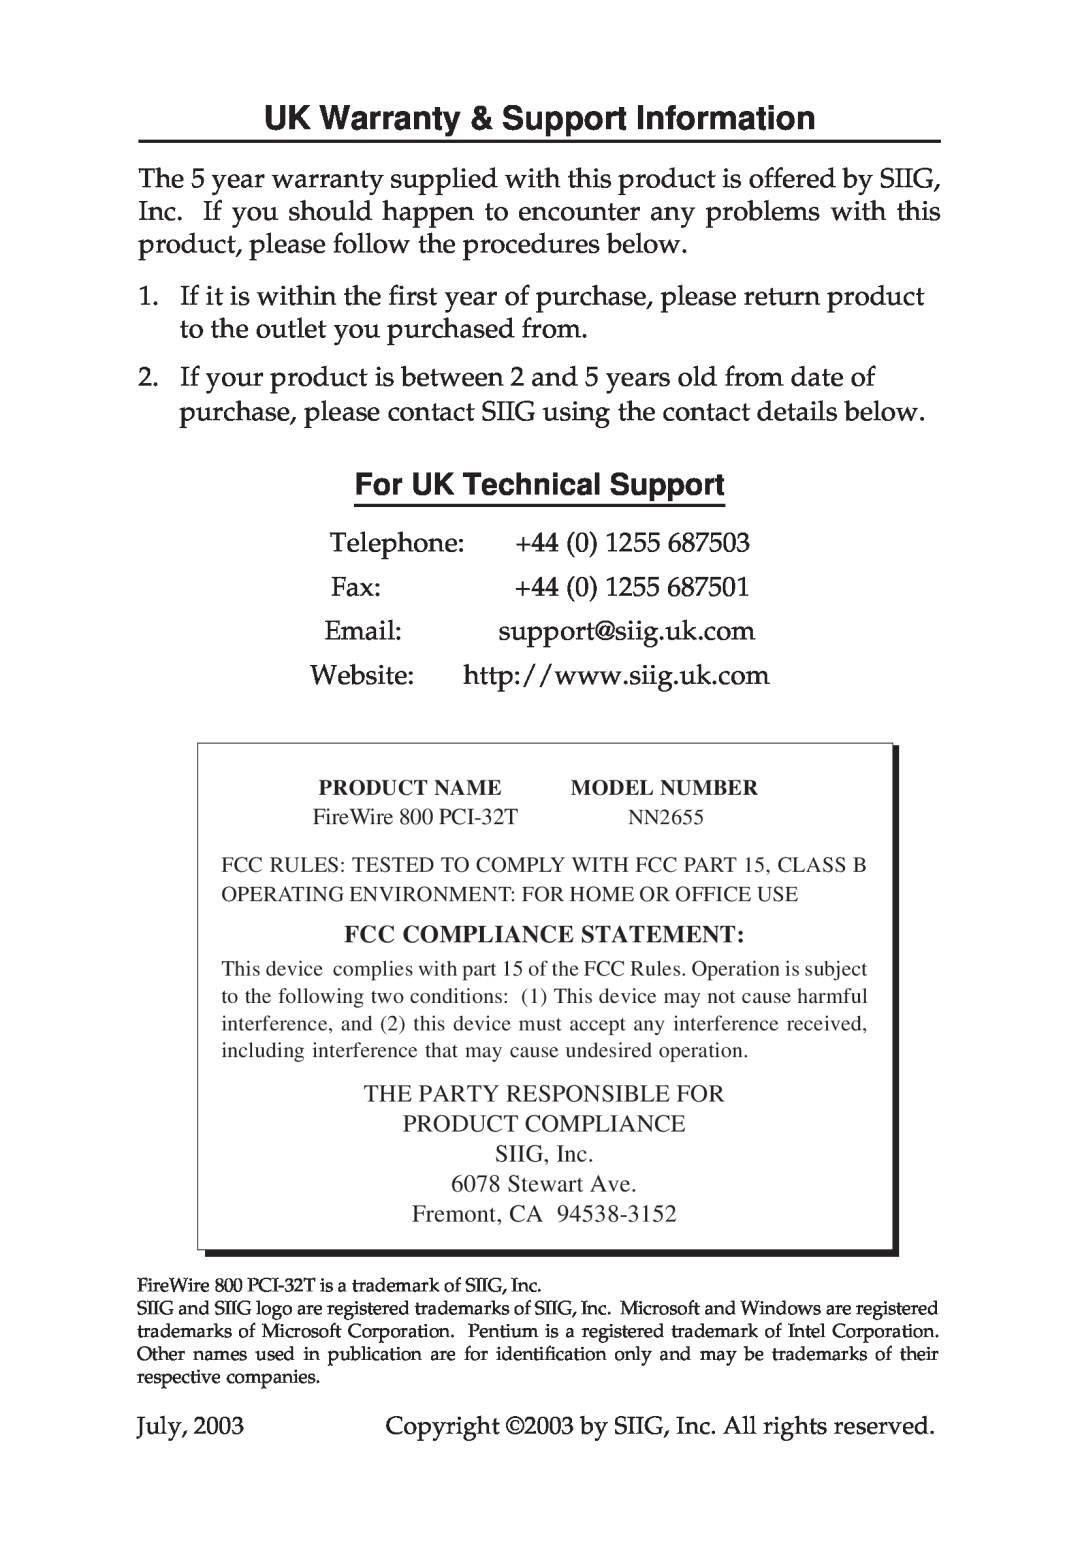 SIIG PCI-32T manual UK Warranty & Support Information, For UK Technical Support 